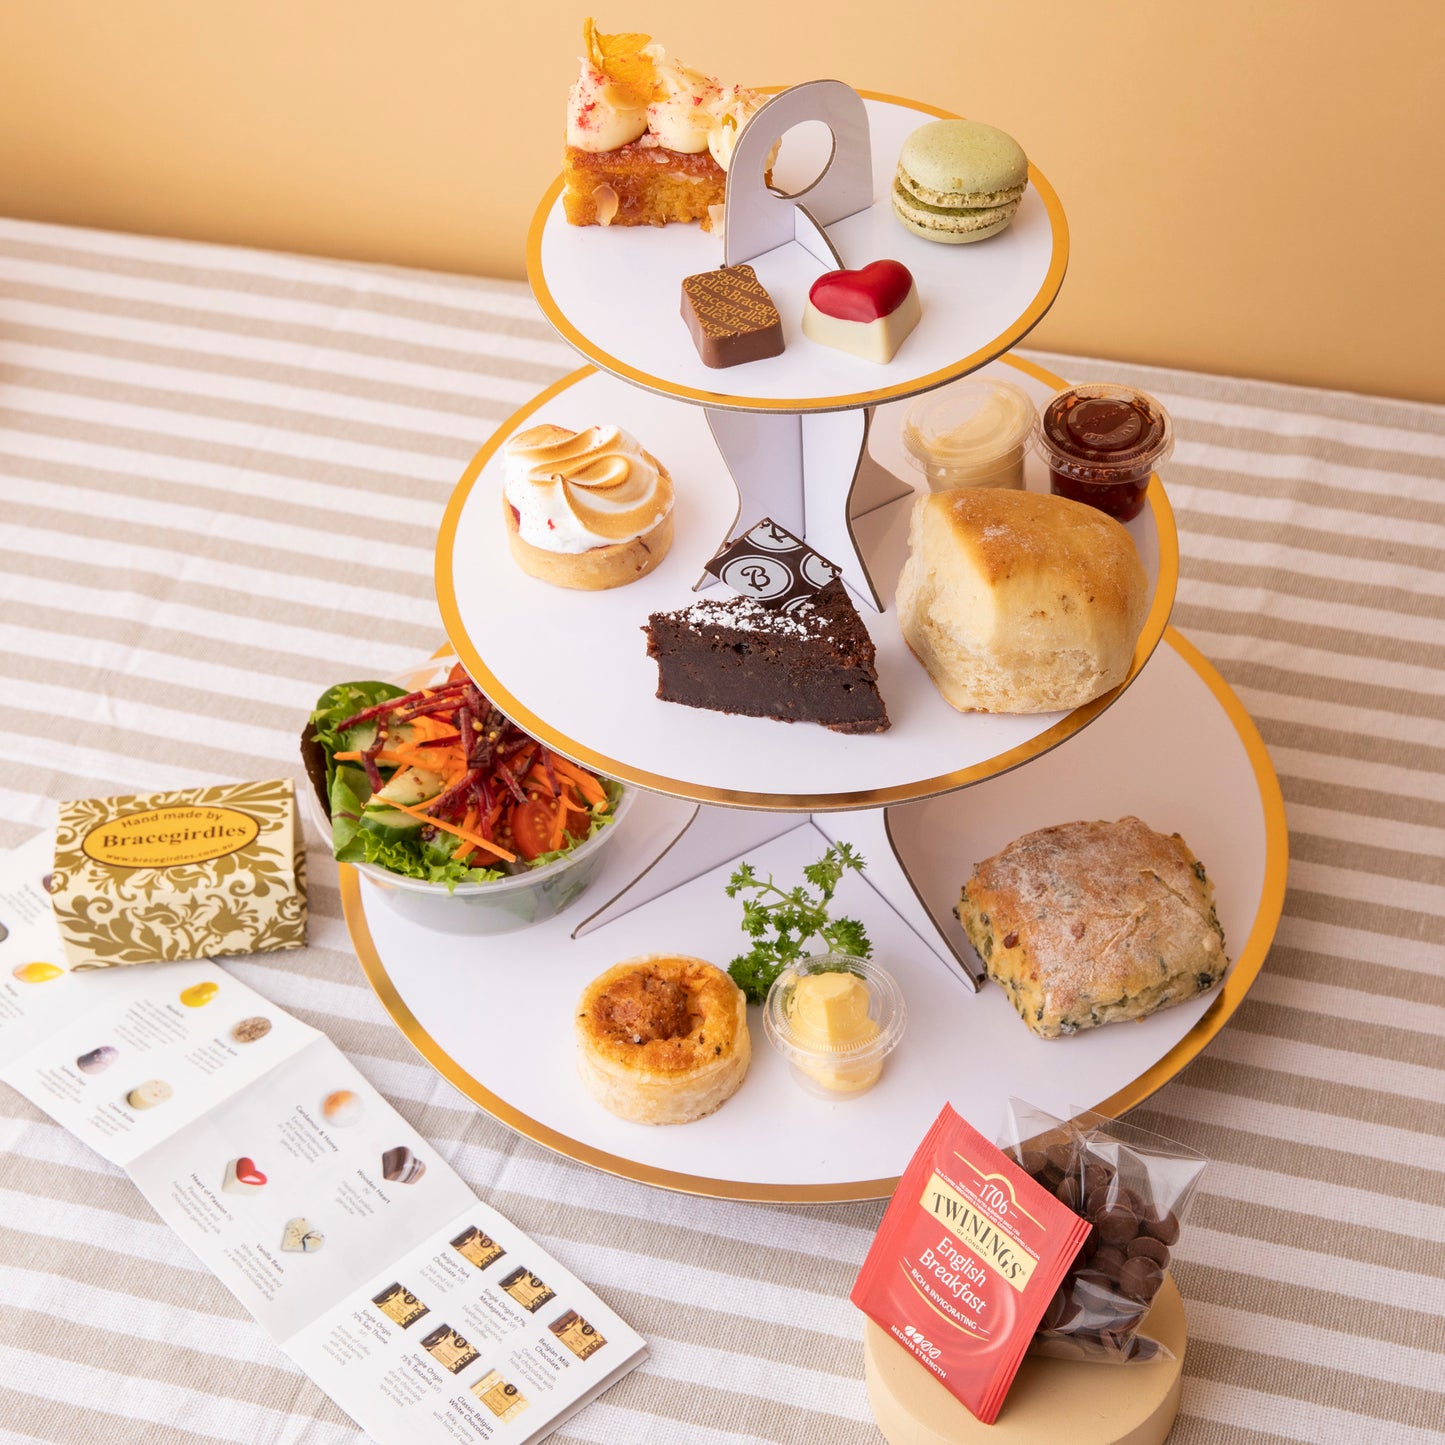 Mrs B’s High Tea at Home Experience